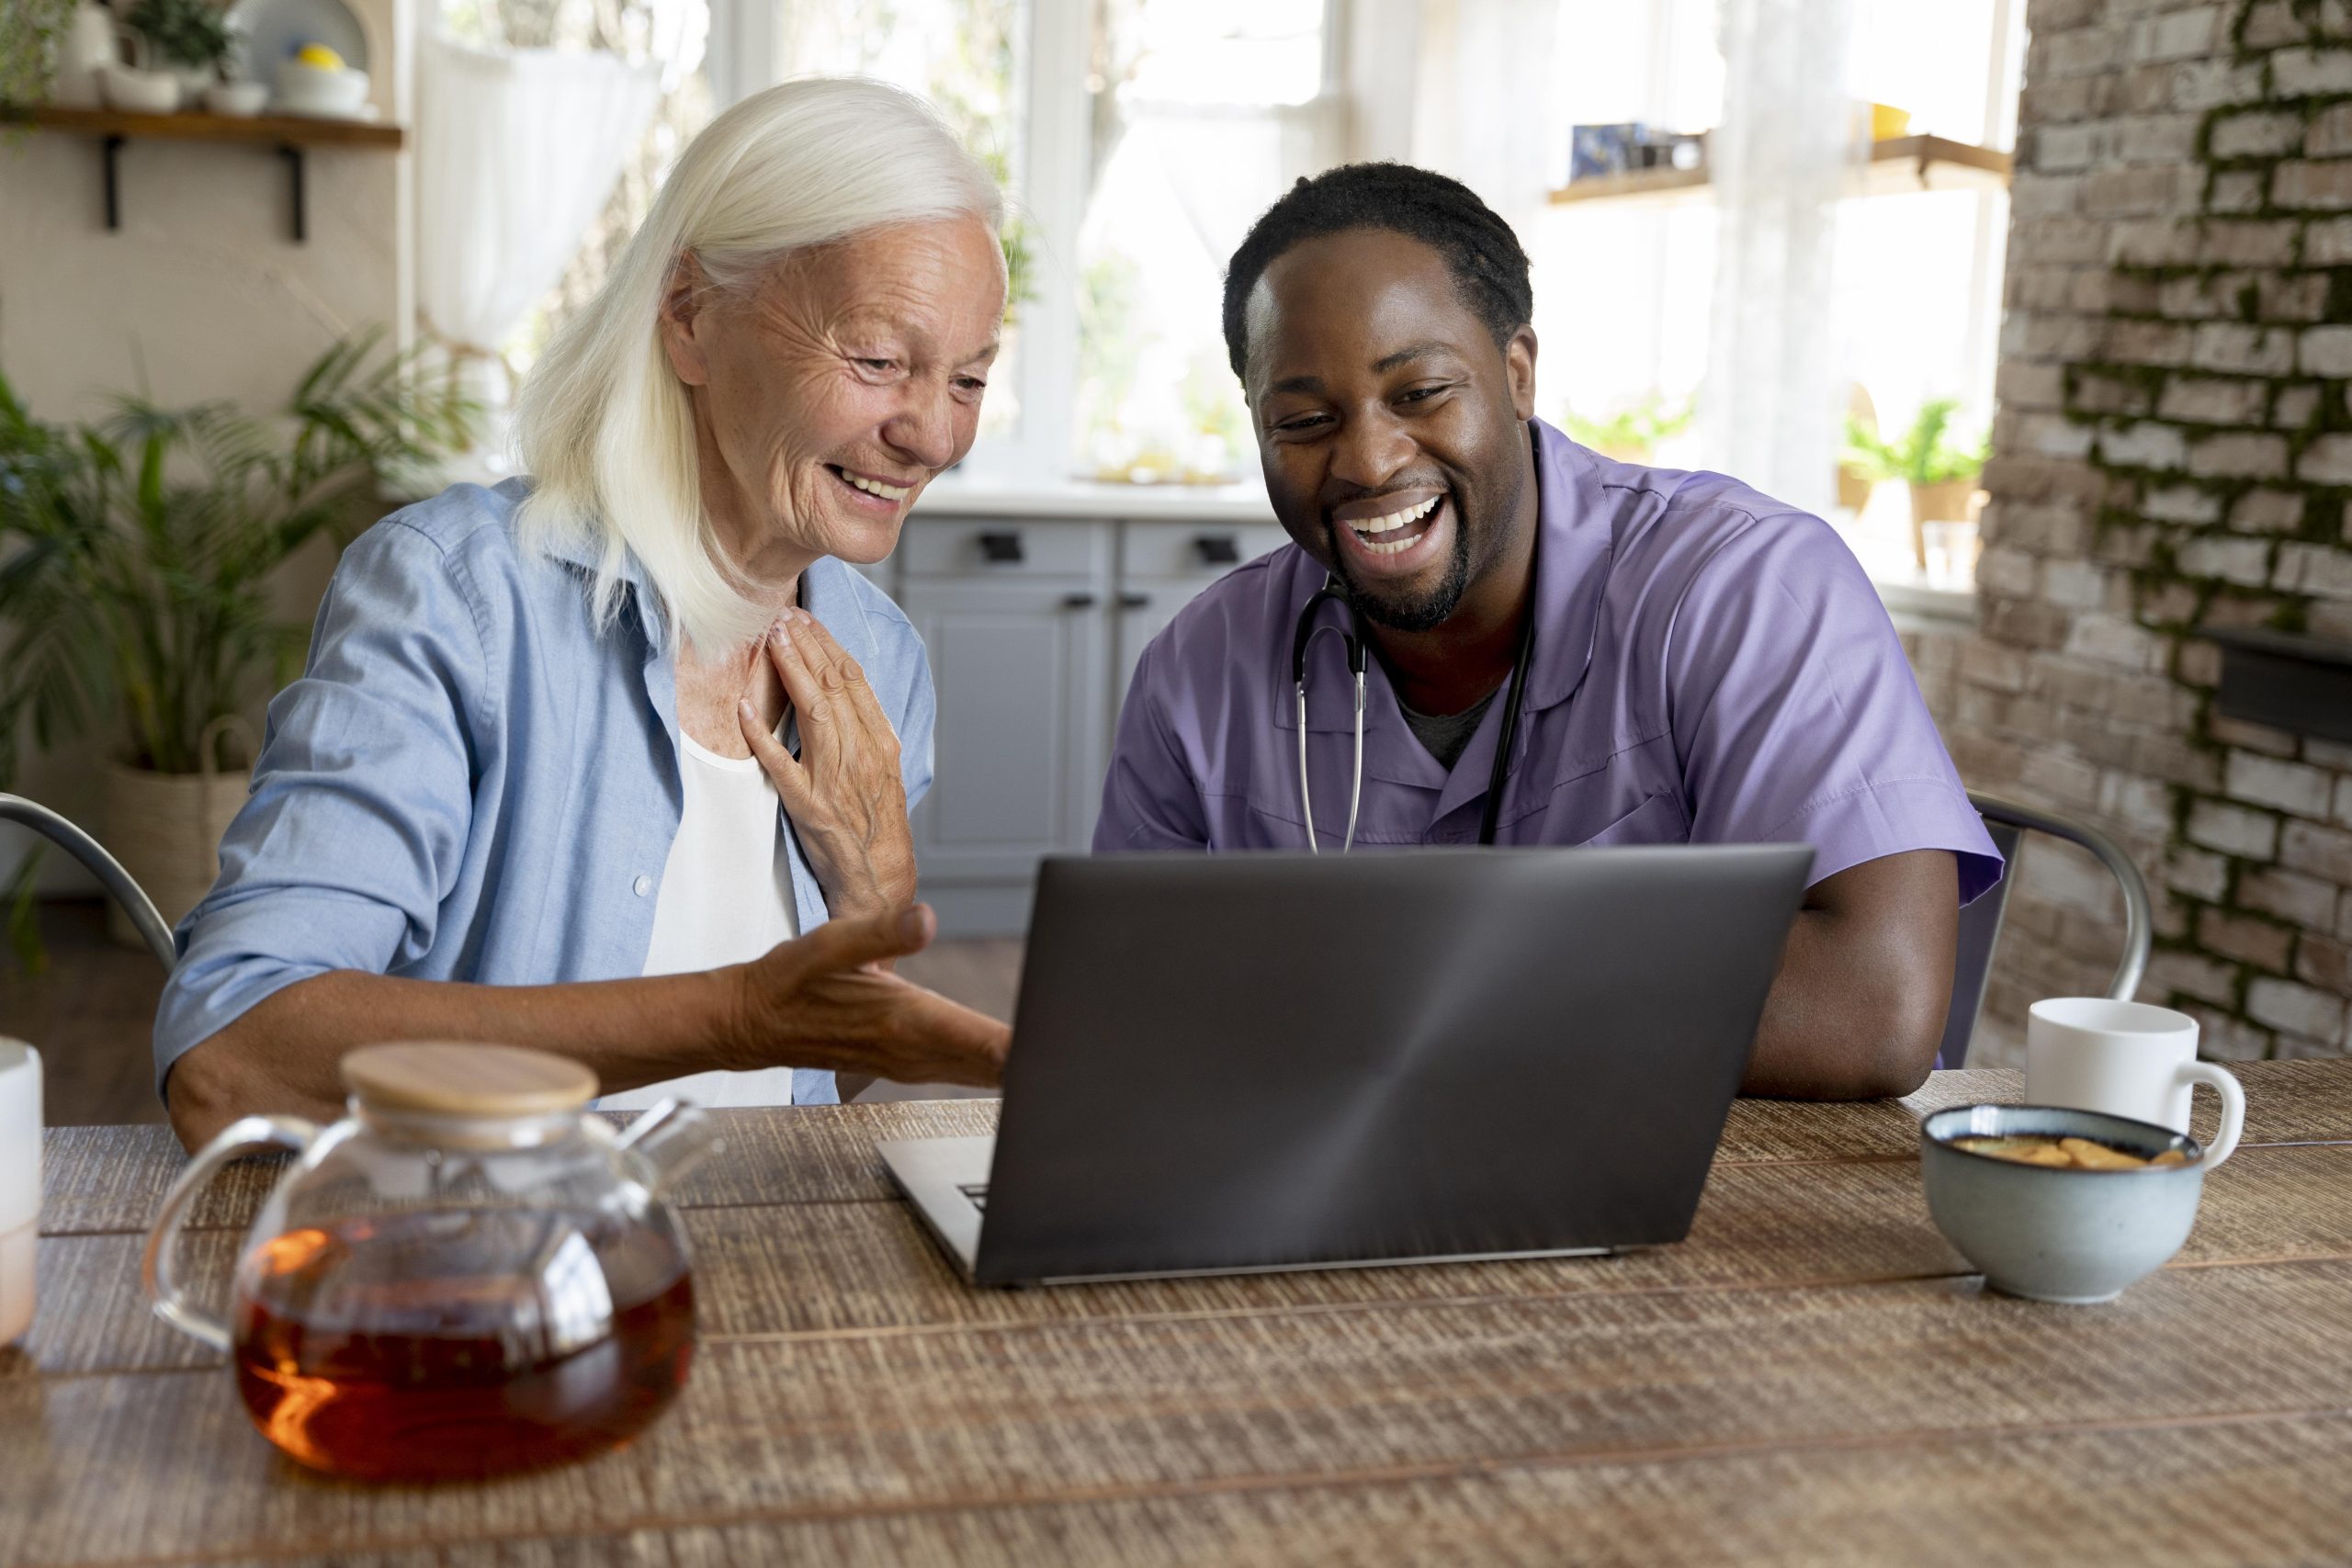 A smiley, friendly social worker in their scrubs is looking at a laptop screen while sitting at the breakfast table next to a senior person who is also smiling at the laptop screen.